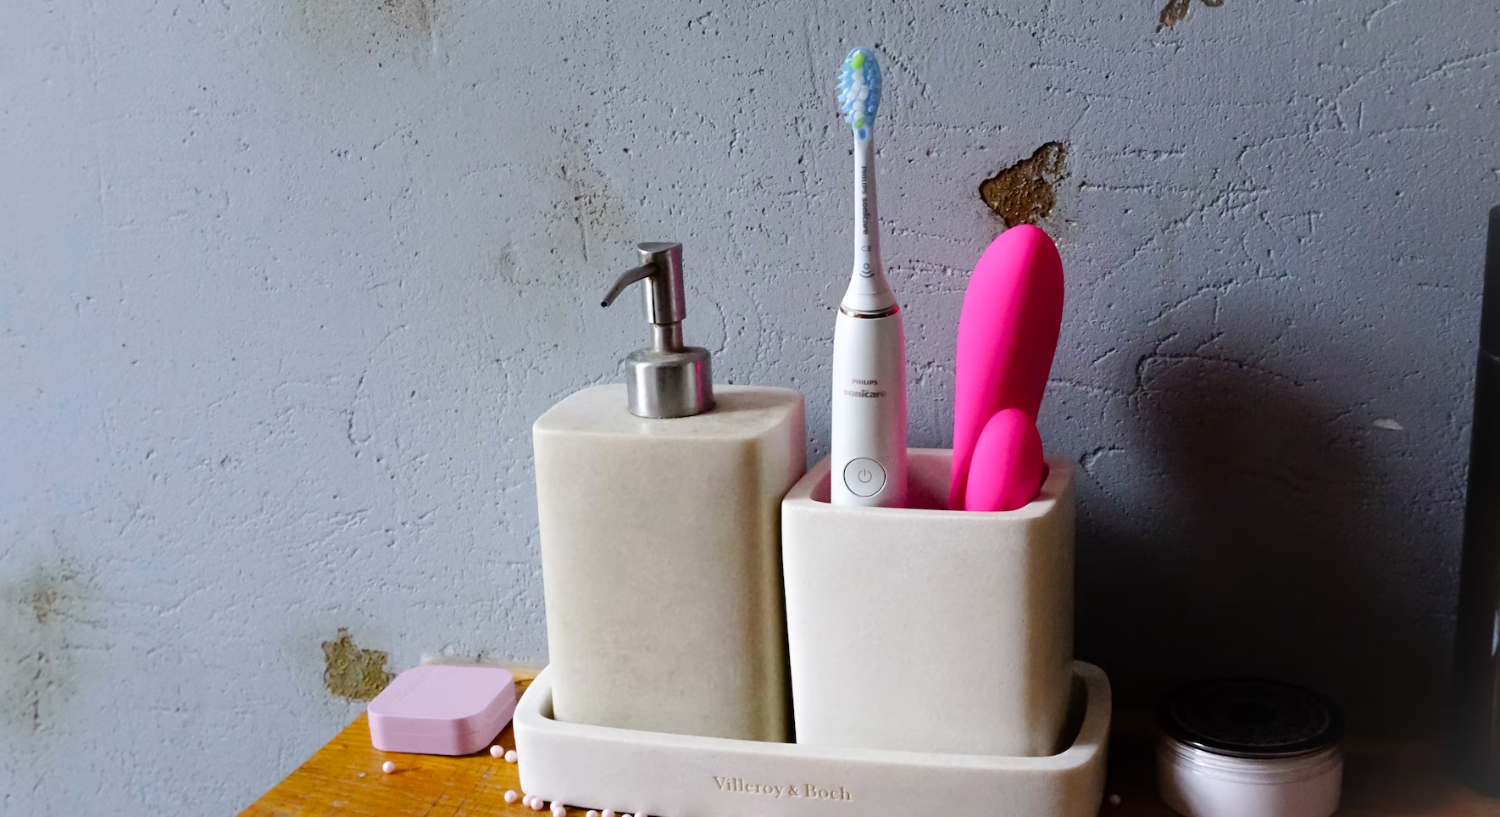 A vibrator inside a toothbrush holder stand next to a toothbrush